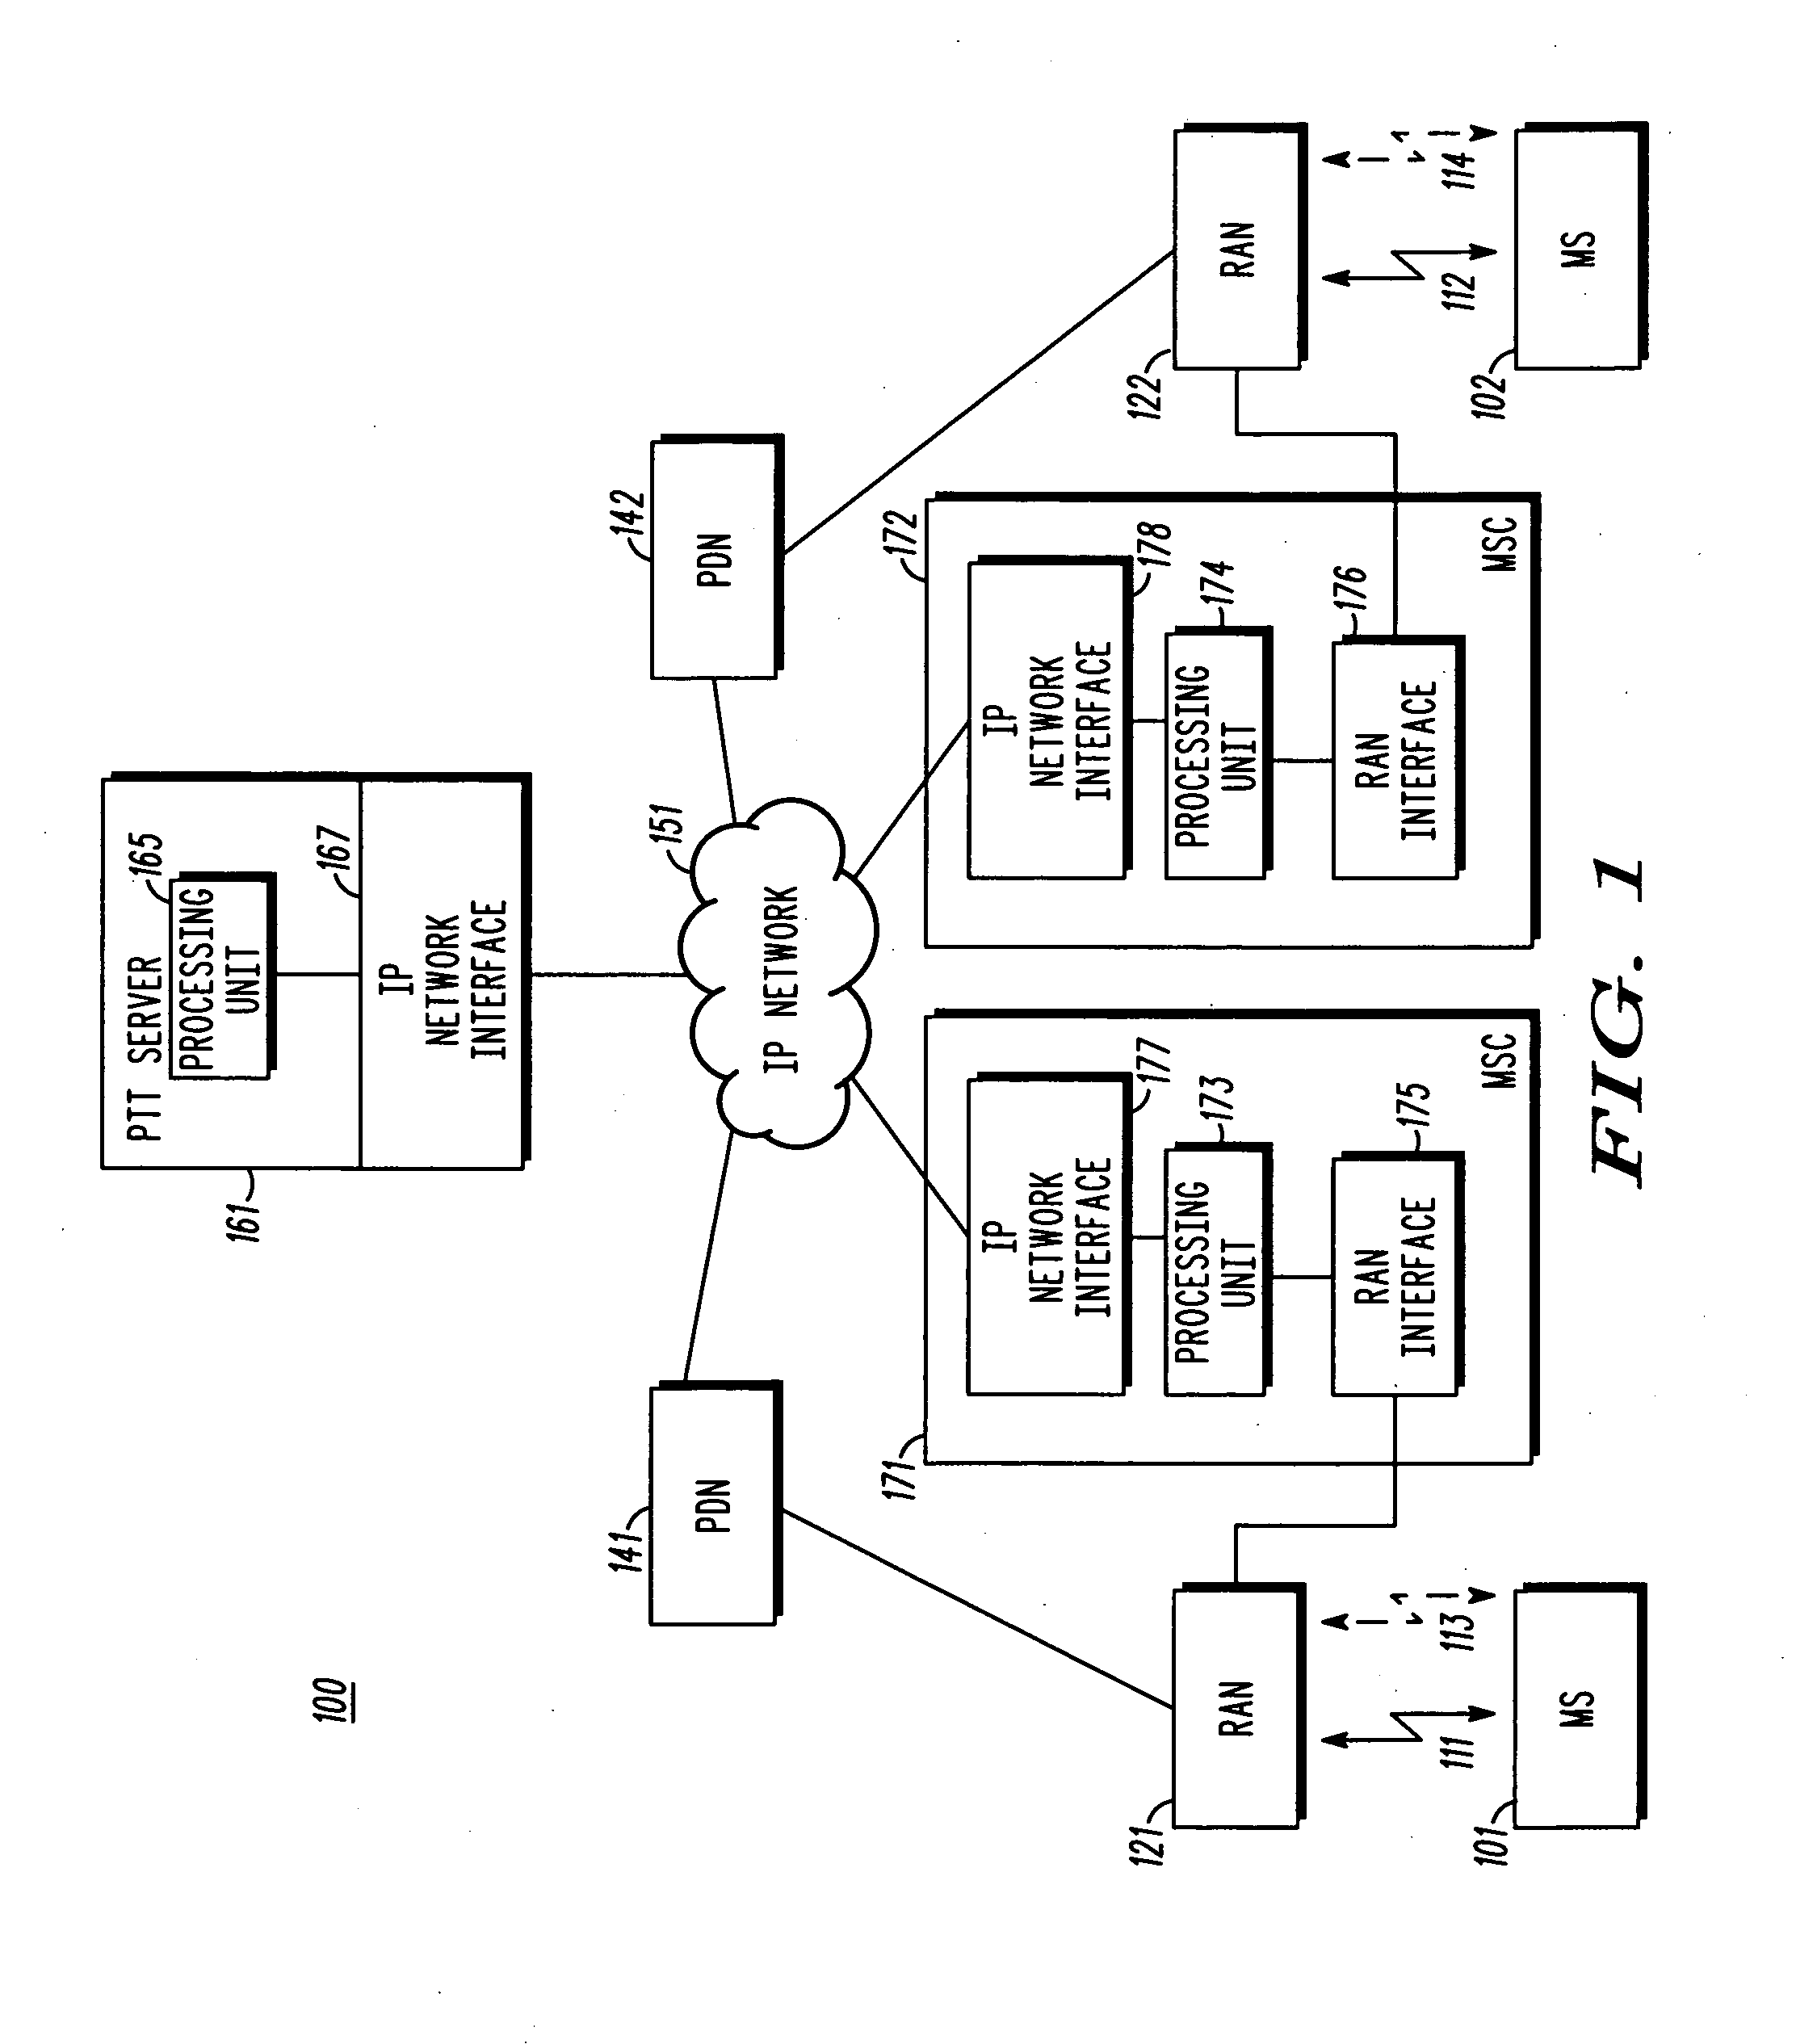 Method and apparatus for facilitating PTT session initiation and service interaction using an IP-based protocol